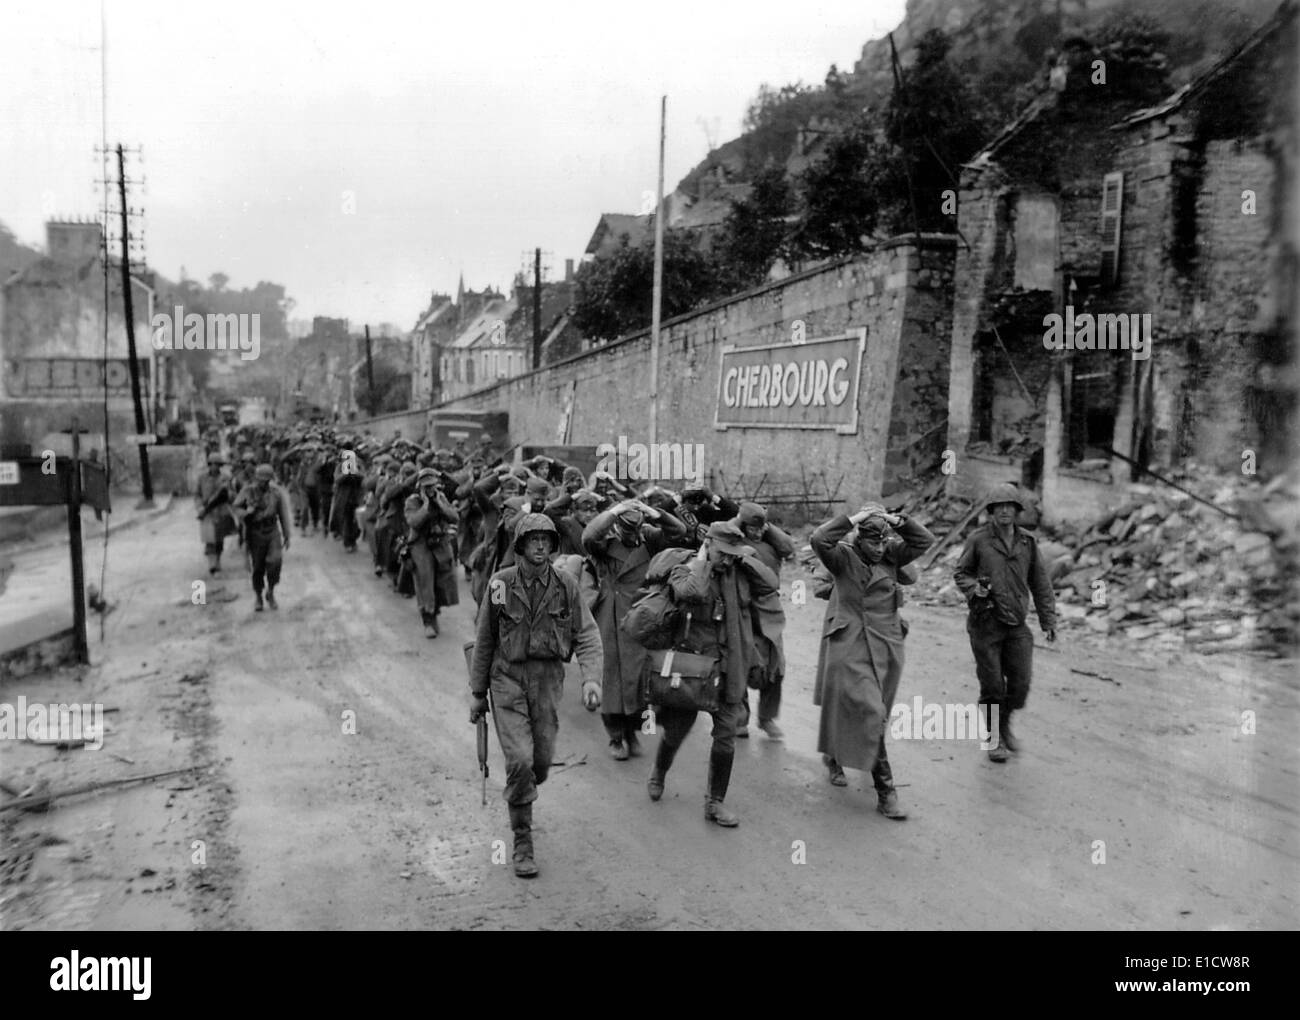 German prisoners taken in fighting Cherbourg, France on June 22-25, 1944. Many other German troops without ammunition were Stock Photo